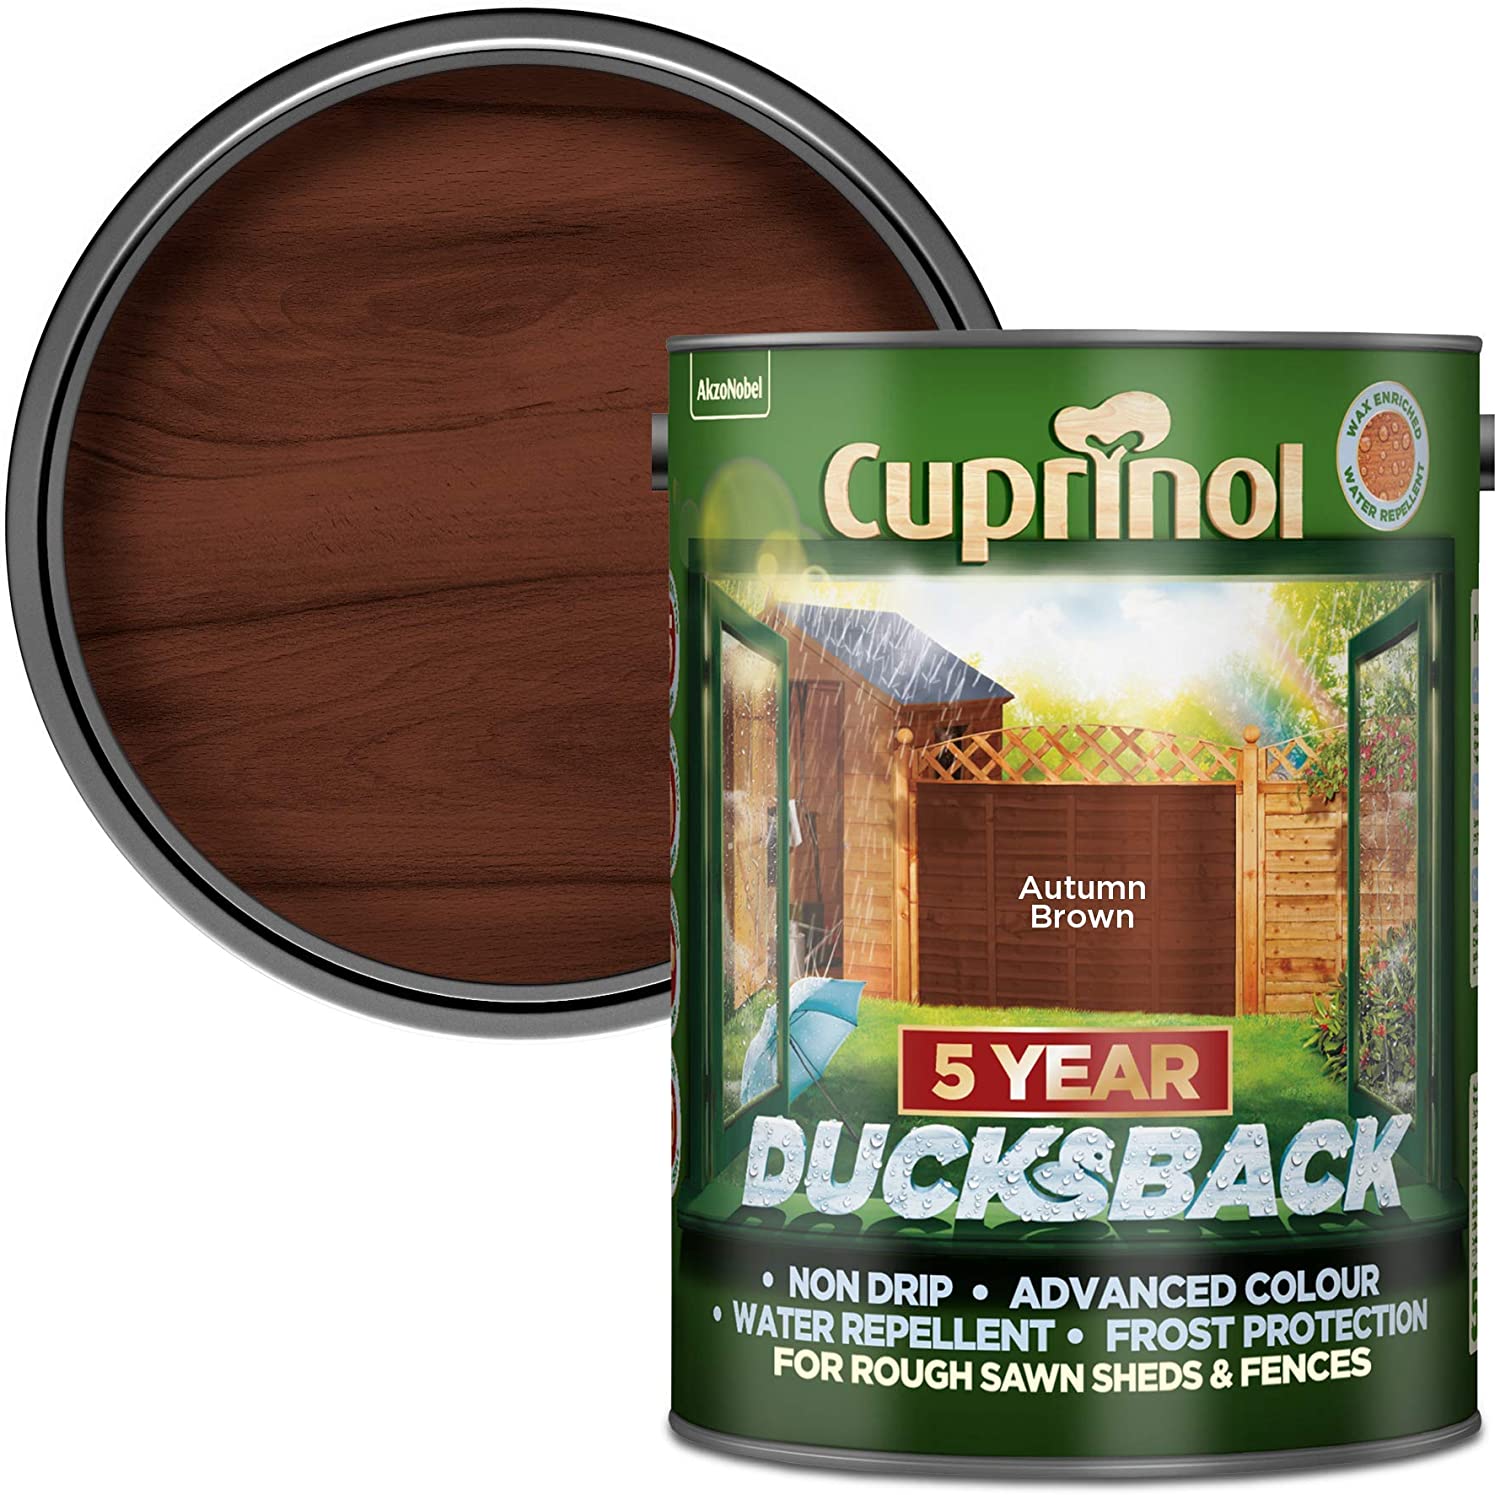 Cuprinol-Ducksback-5-Year-Waterproof-for-Sheds-and-Fences-Autumn-Brown-5-Litre